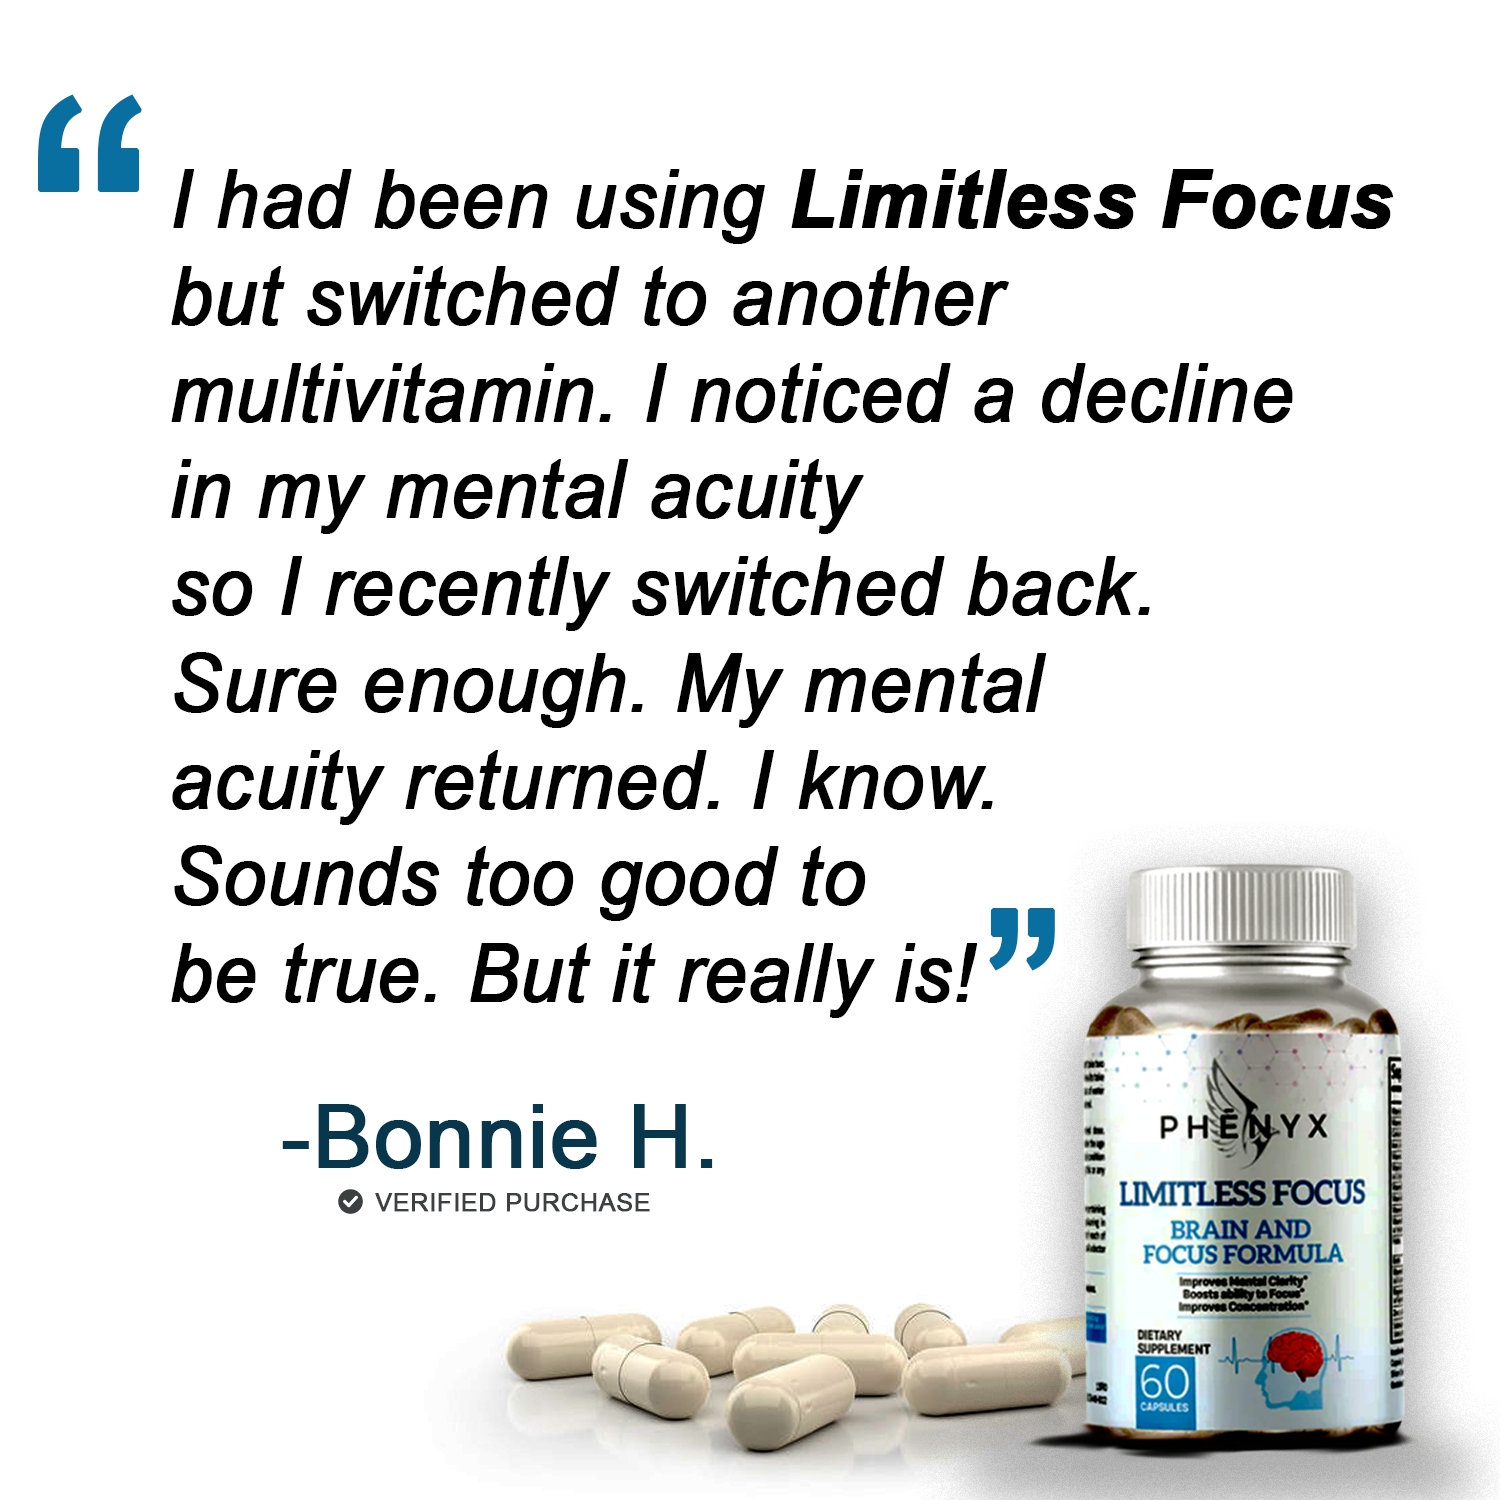 The Limitless Focus